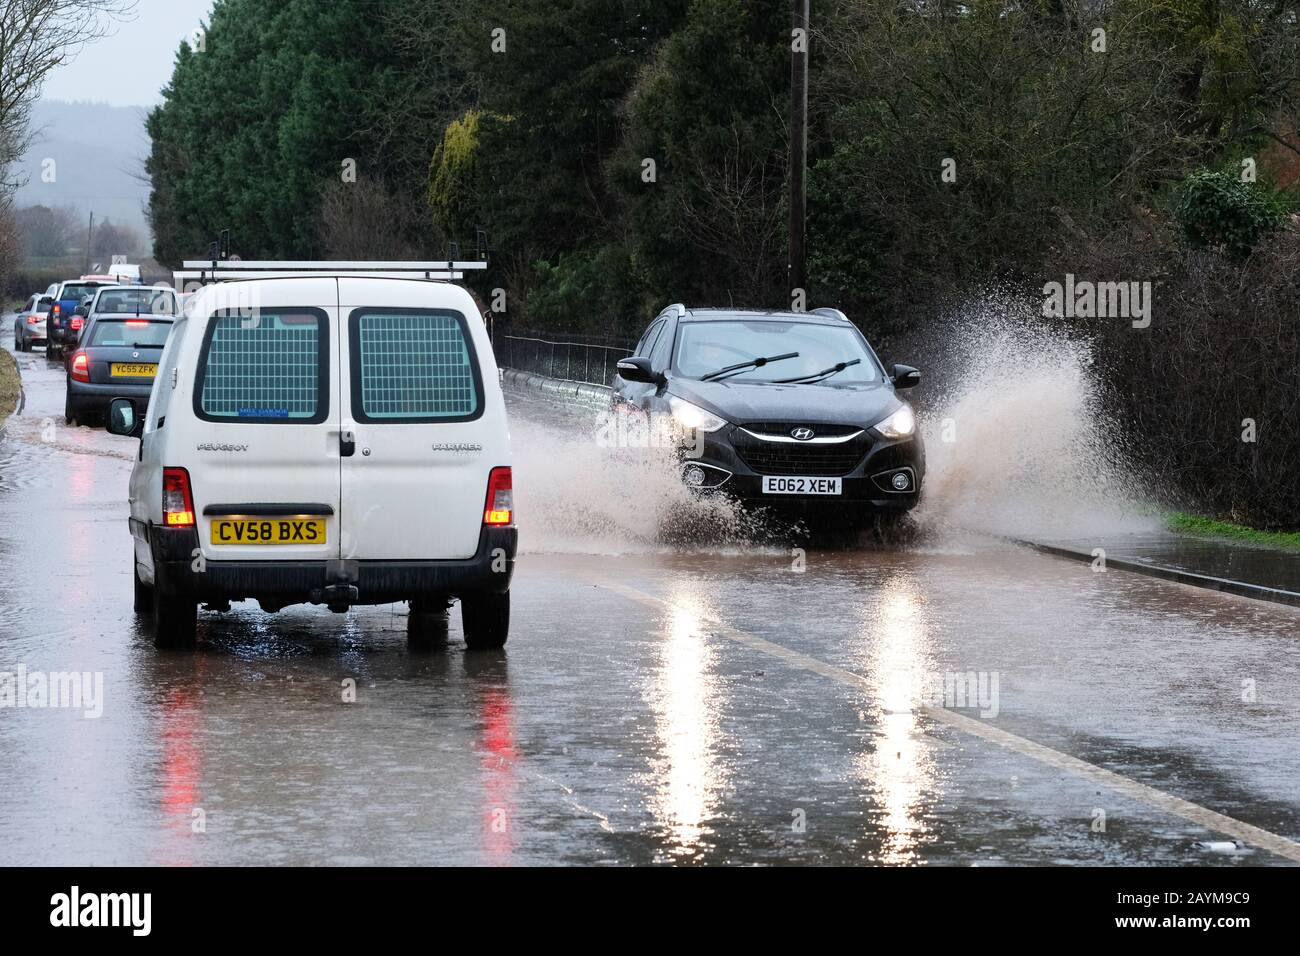 A49 road, Moreton on Lugg, Herefordshire, UK - Sunday 16th February 2020 heavy overnight rain has brought flooding to the A49 between Hereford and Leominster, the only main trunk road through the county, at Moreton on Lugg just north of Hereford city. Photo Steven May / Alamy Live News Stock Photo